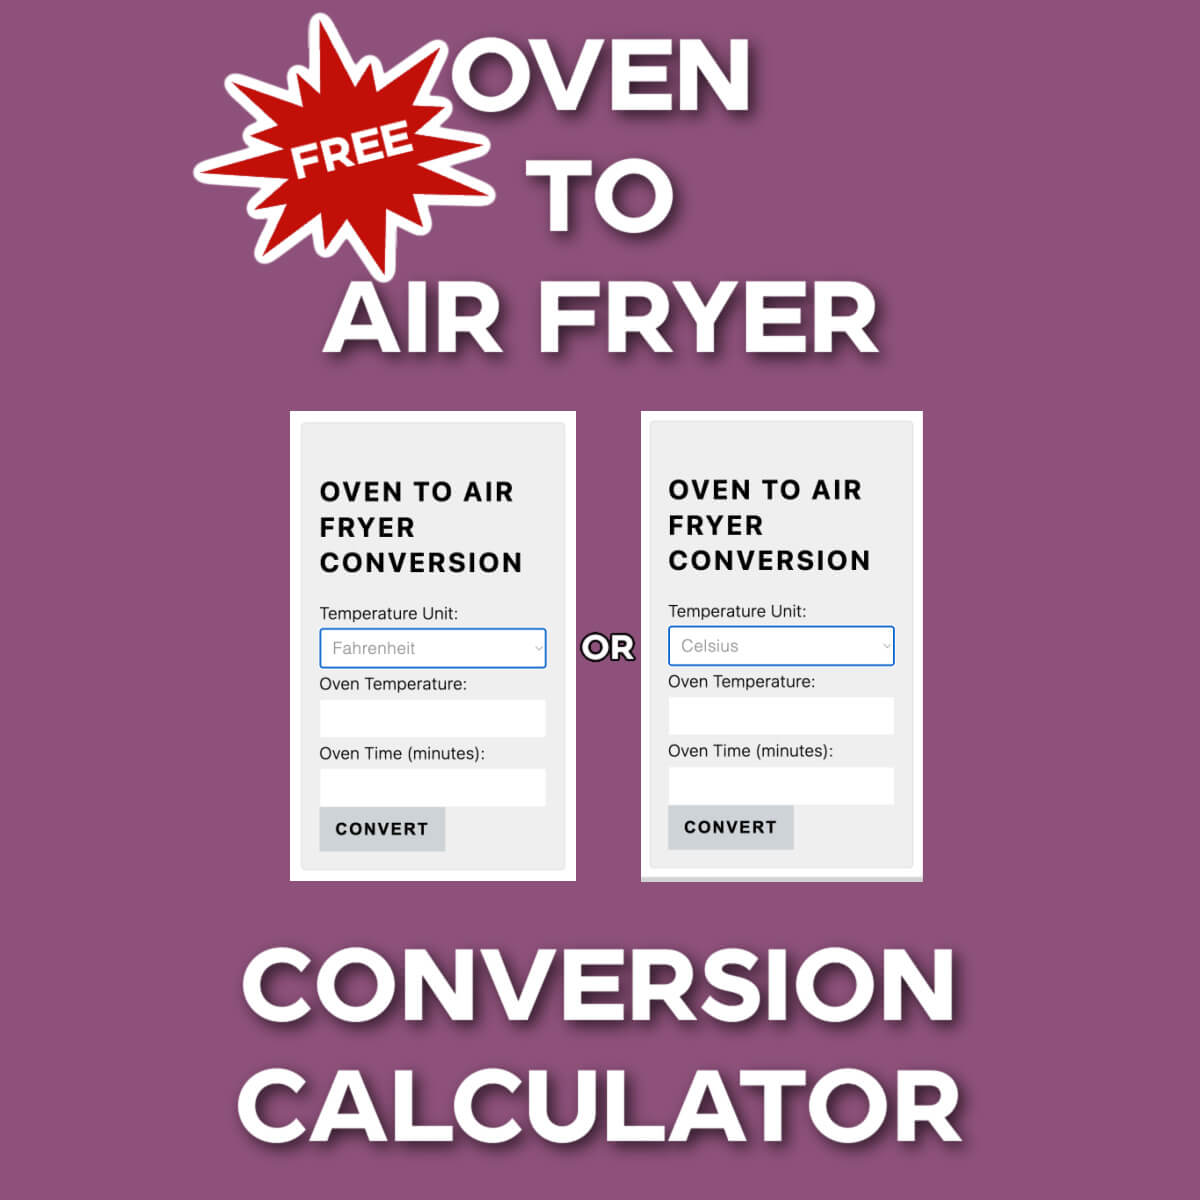 Oven to air fryer conversion calculators in both Fahreheit and Celsius on a purple background.